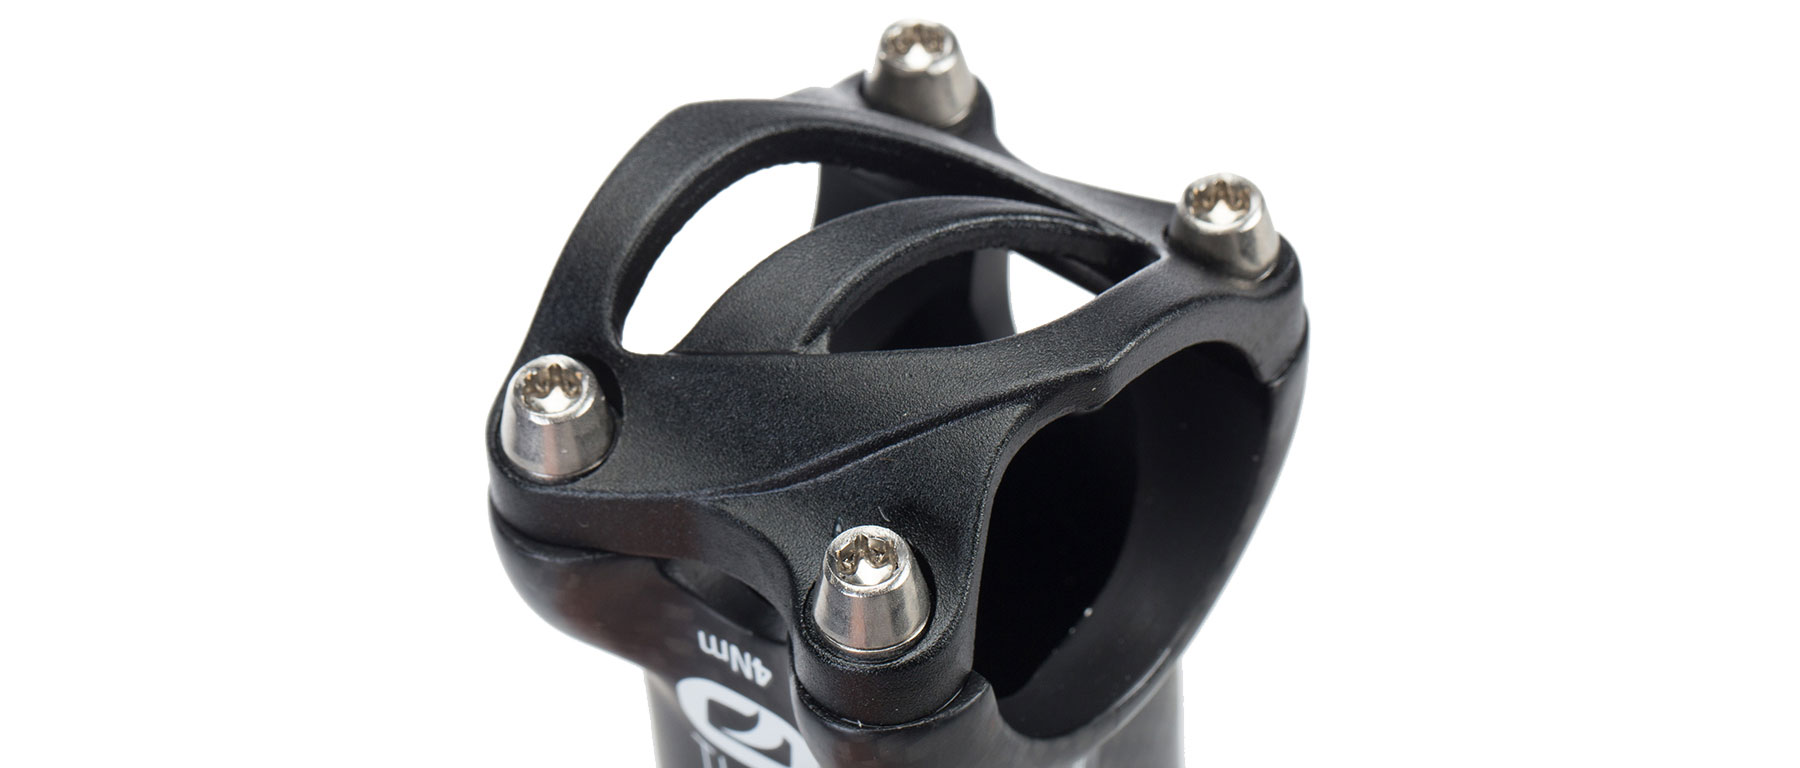 Most Tiger Ultra Aero 3k Di2 Stem Excel Sports | Shop Online From